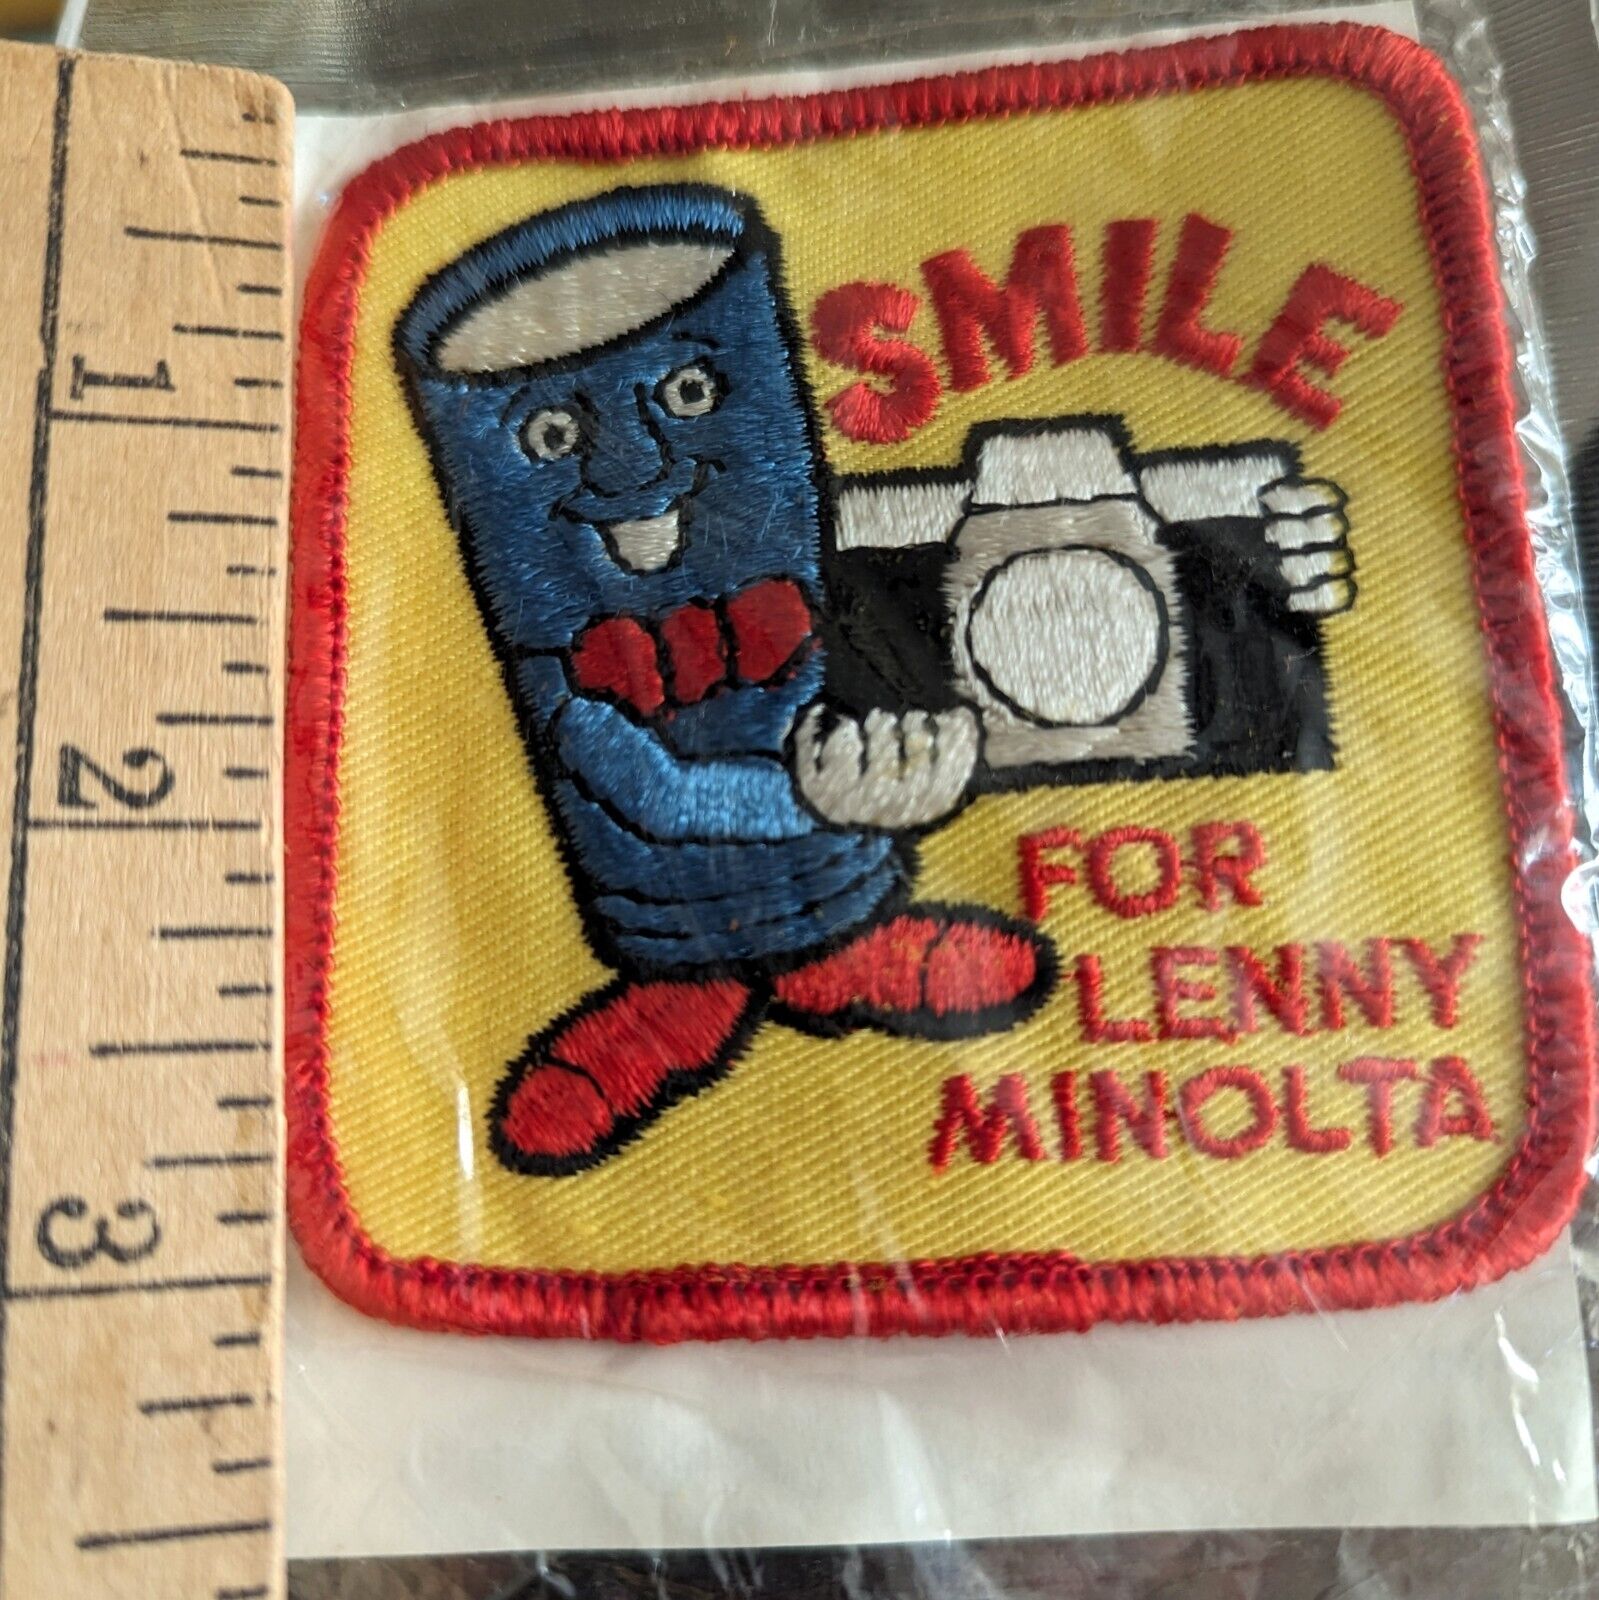 Vtg NOS Smile For Lenny Minolta iron on Patch Photography Equipment Gear Art 80s